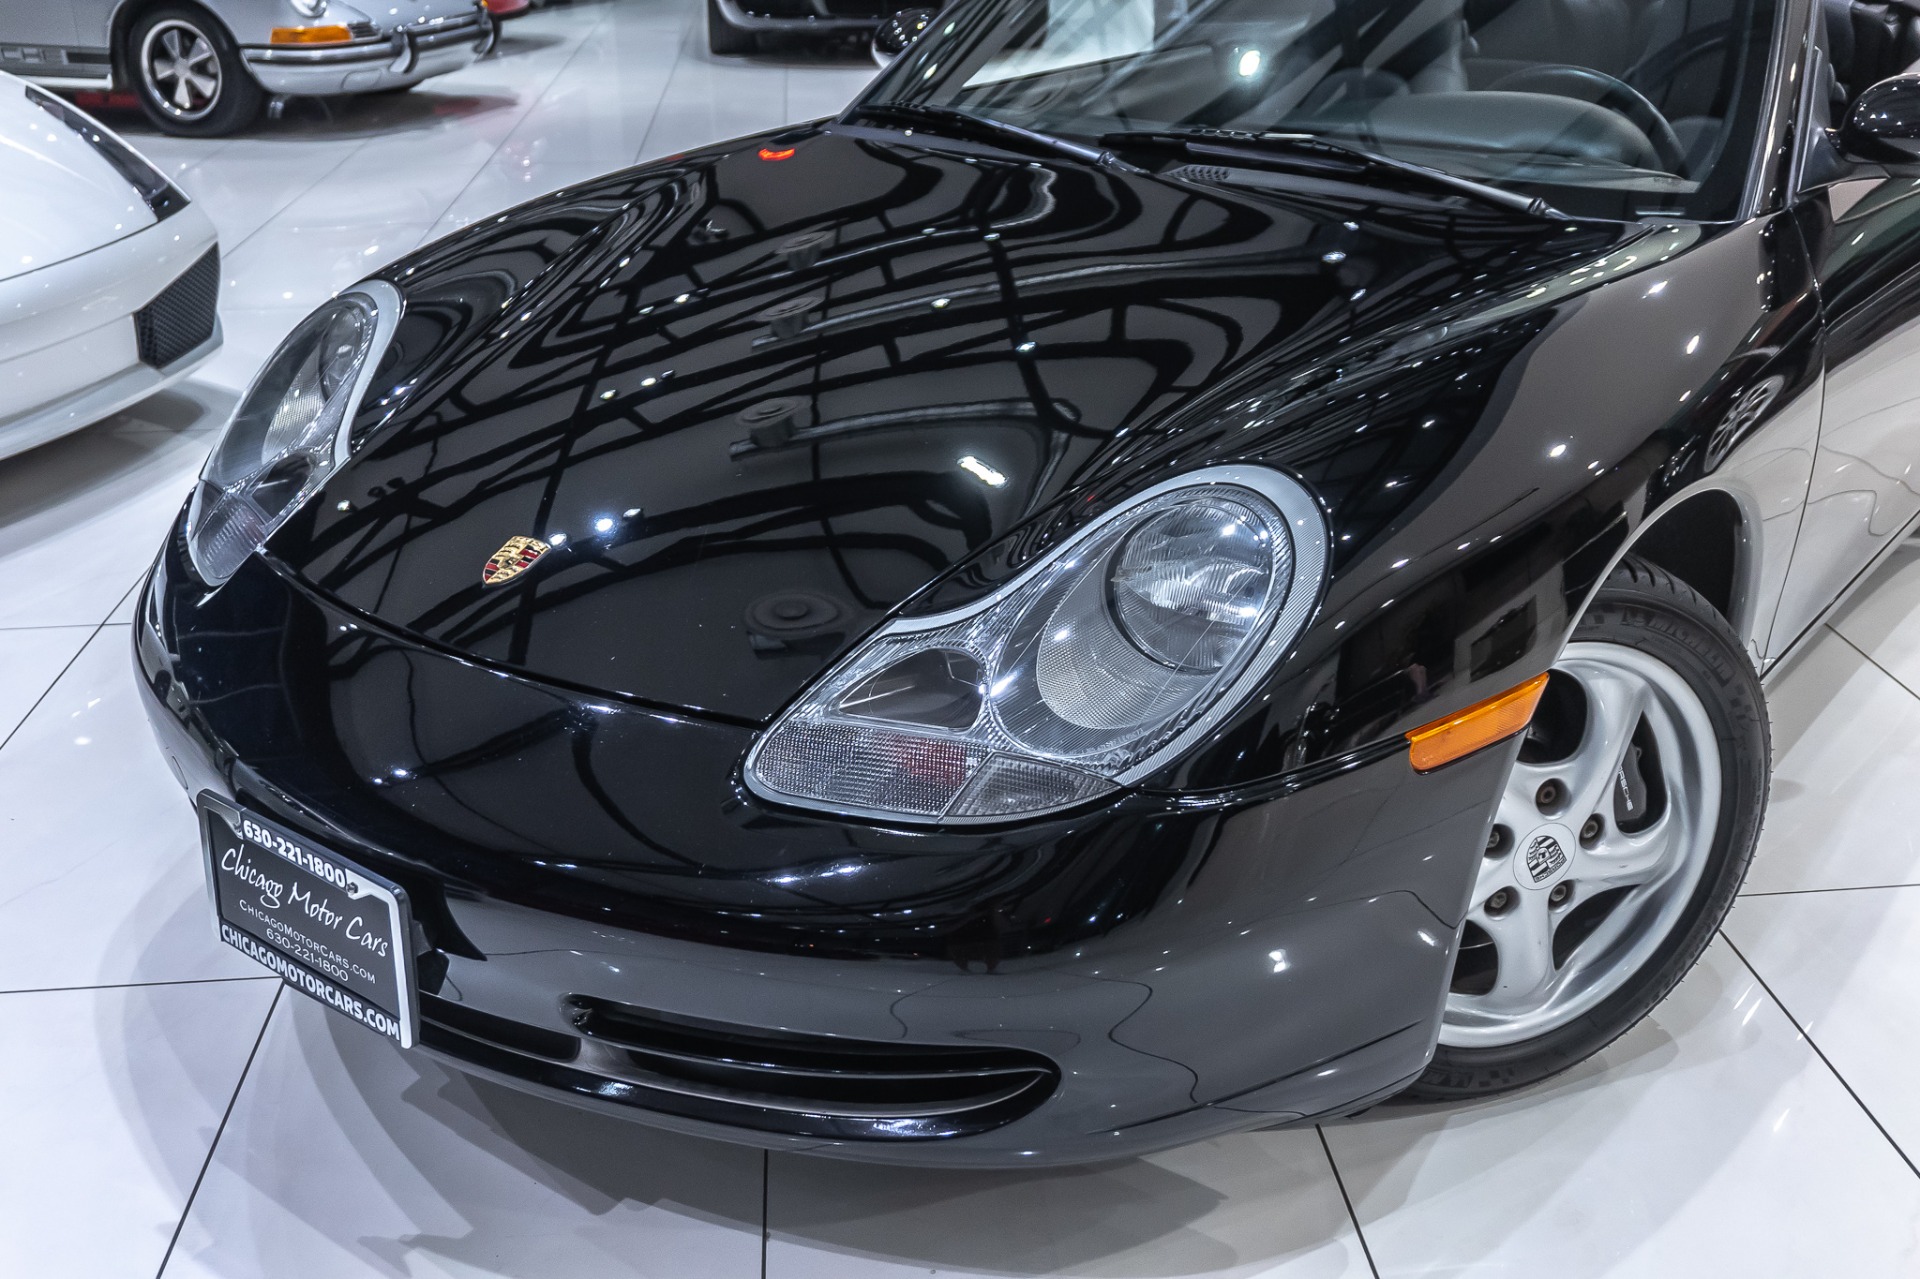 Used-2000-Porsche-911-Carrera-Cabriolet-6-SPEED-MANUAL-TRANSMISSION-SERVICE-HISTORY-NEW-TIRES